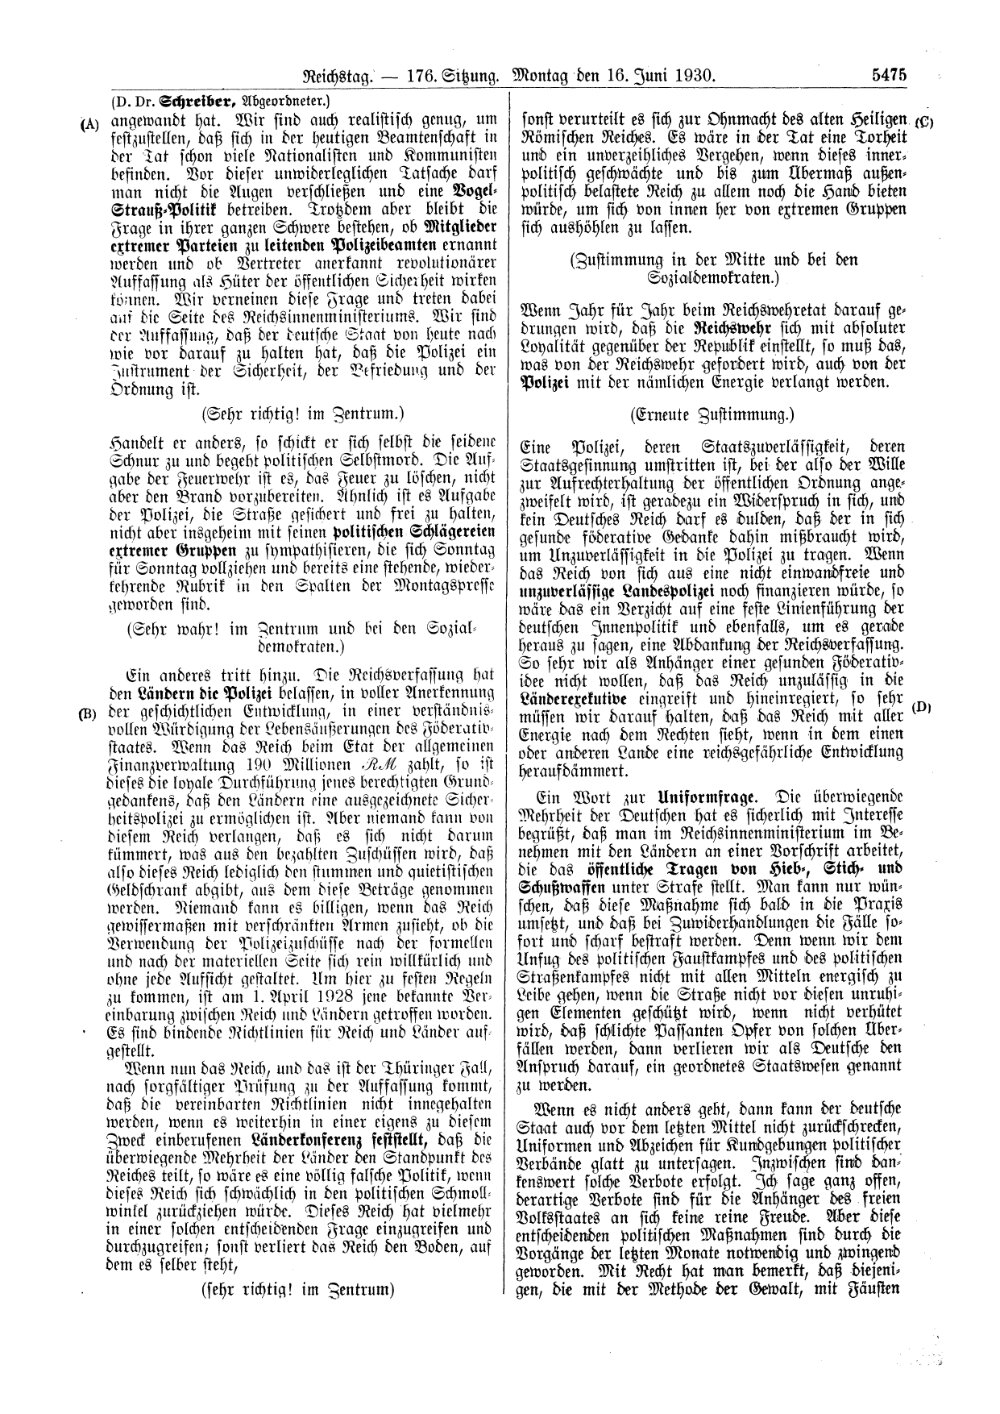 Scan of page 5475